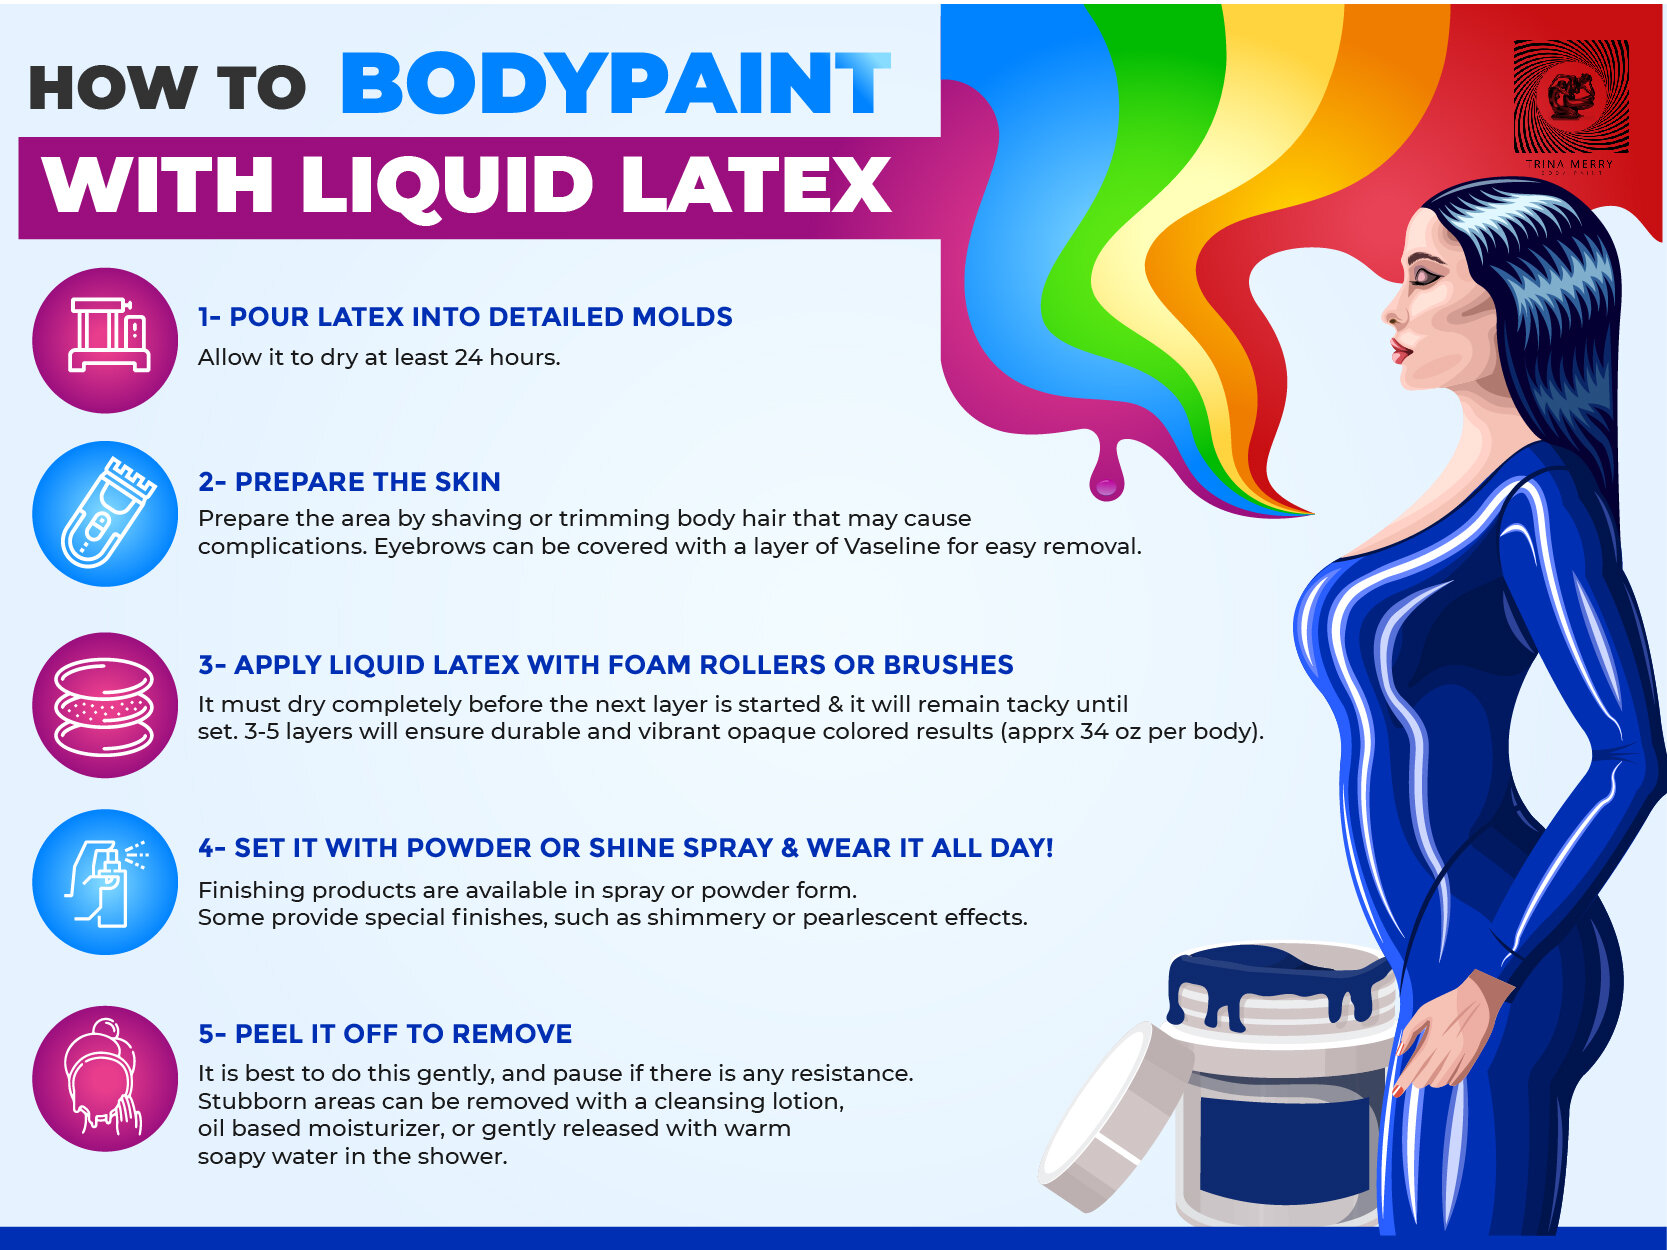 The Right Way to Use Latex Body Paints for Halloween, by Liquid Latex  Online